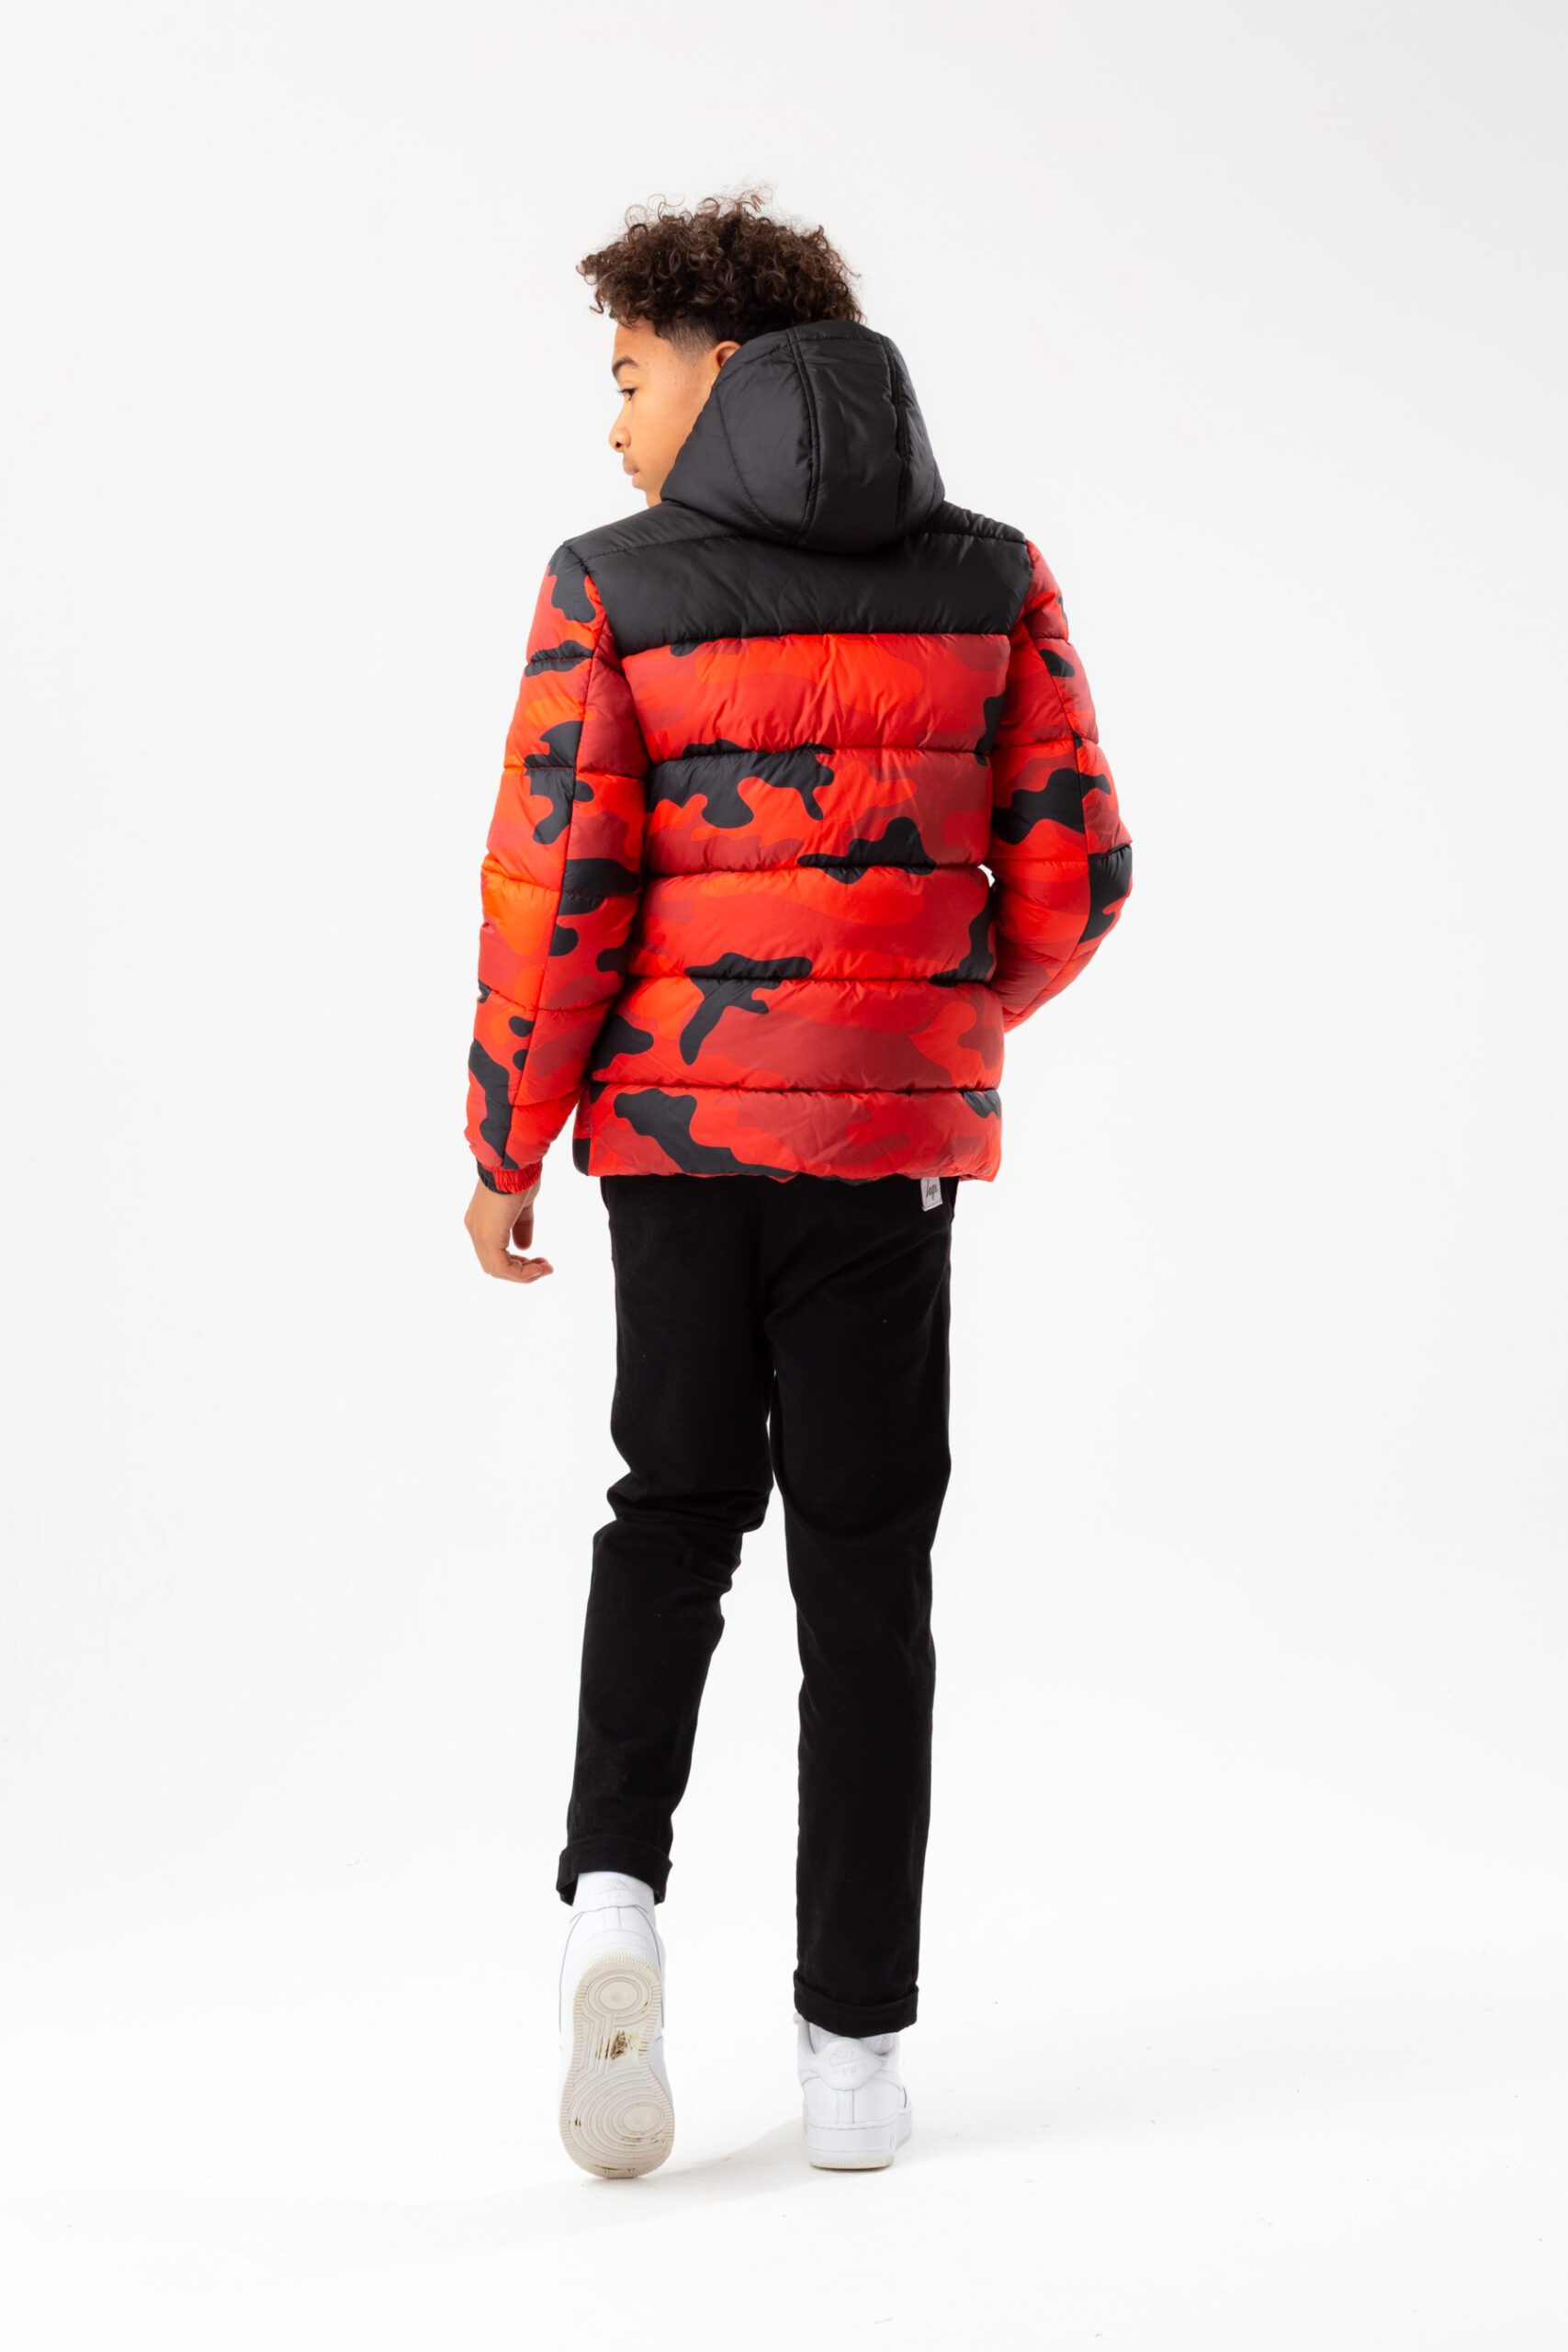 hype boys orange and black camo puffer jacket on model back view